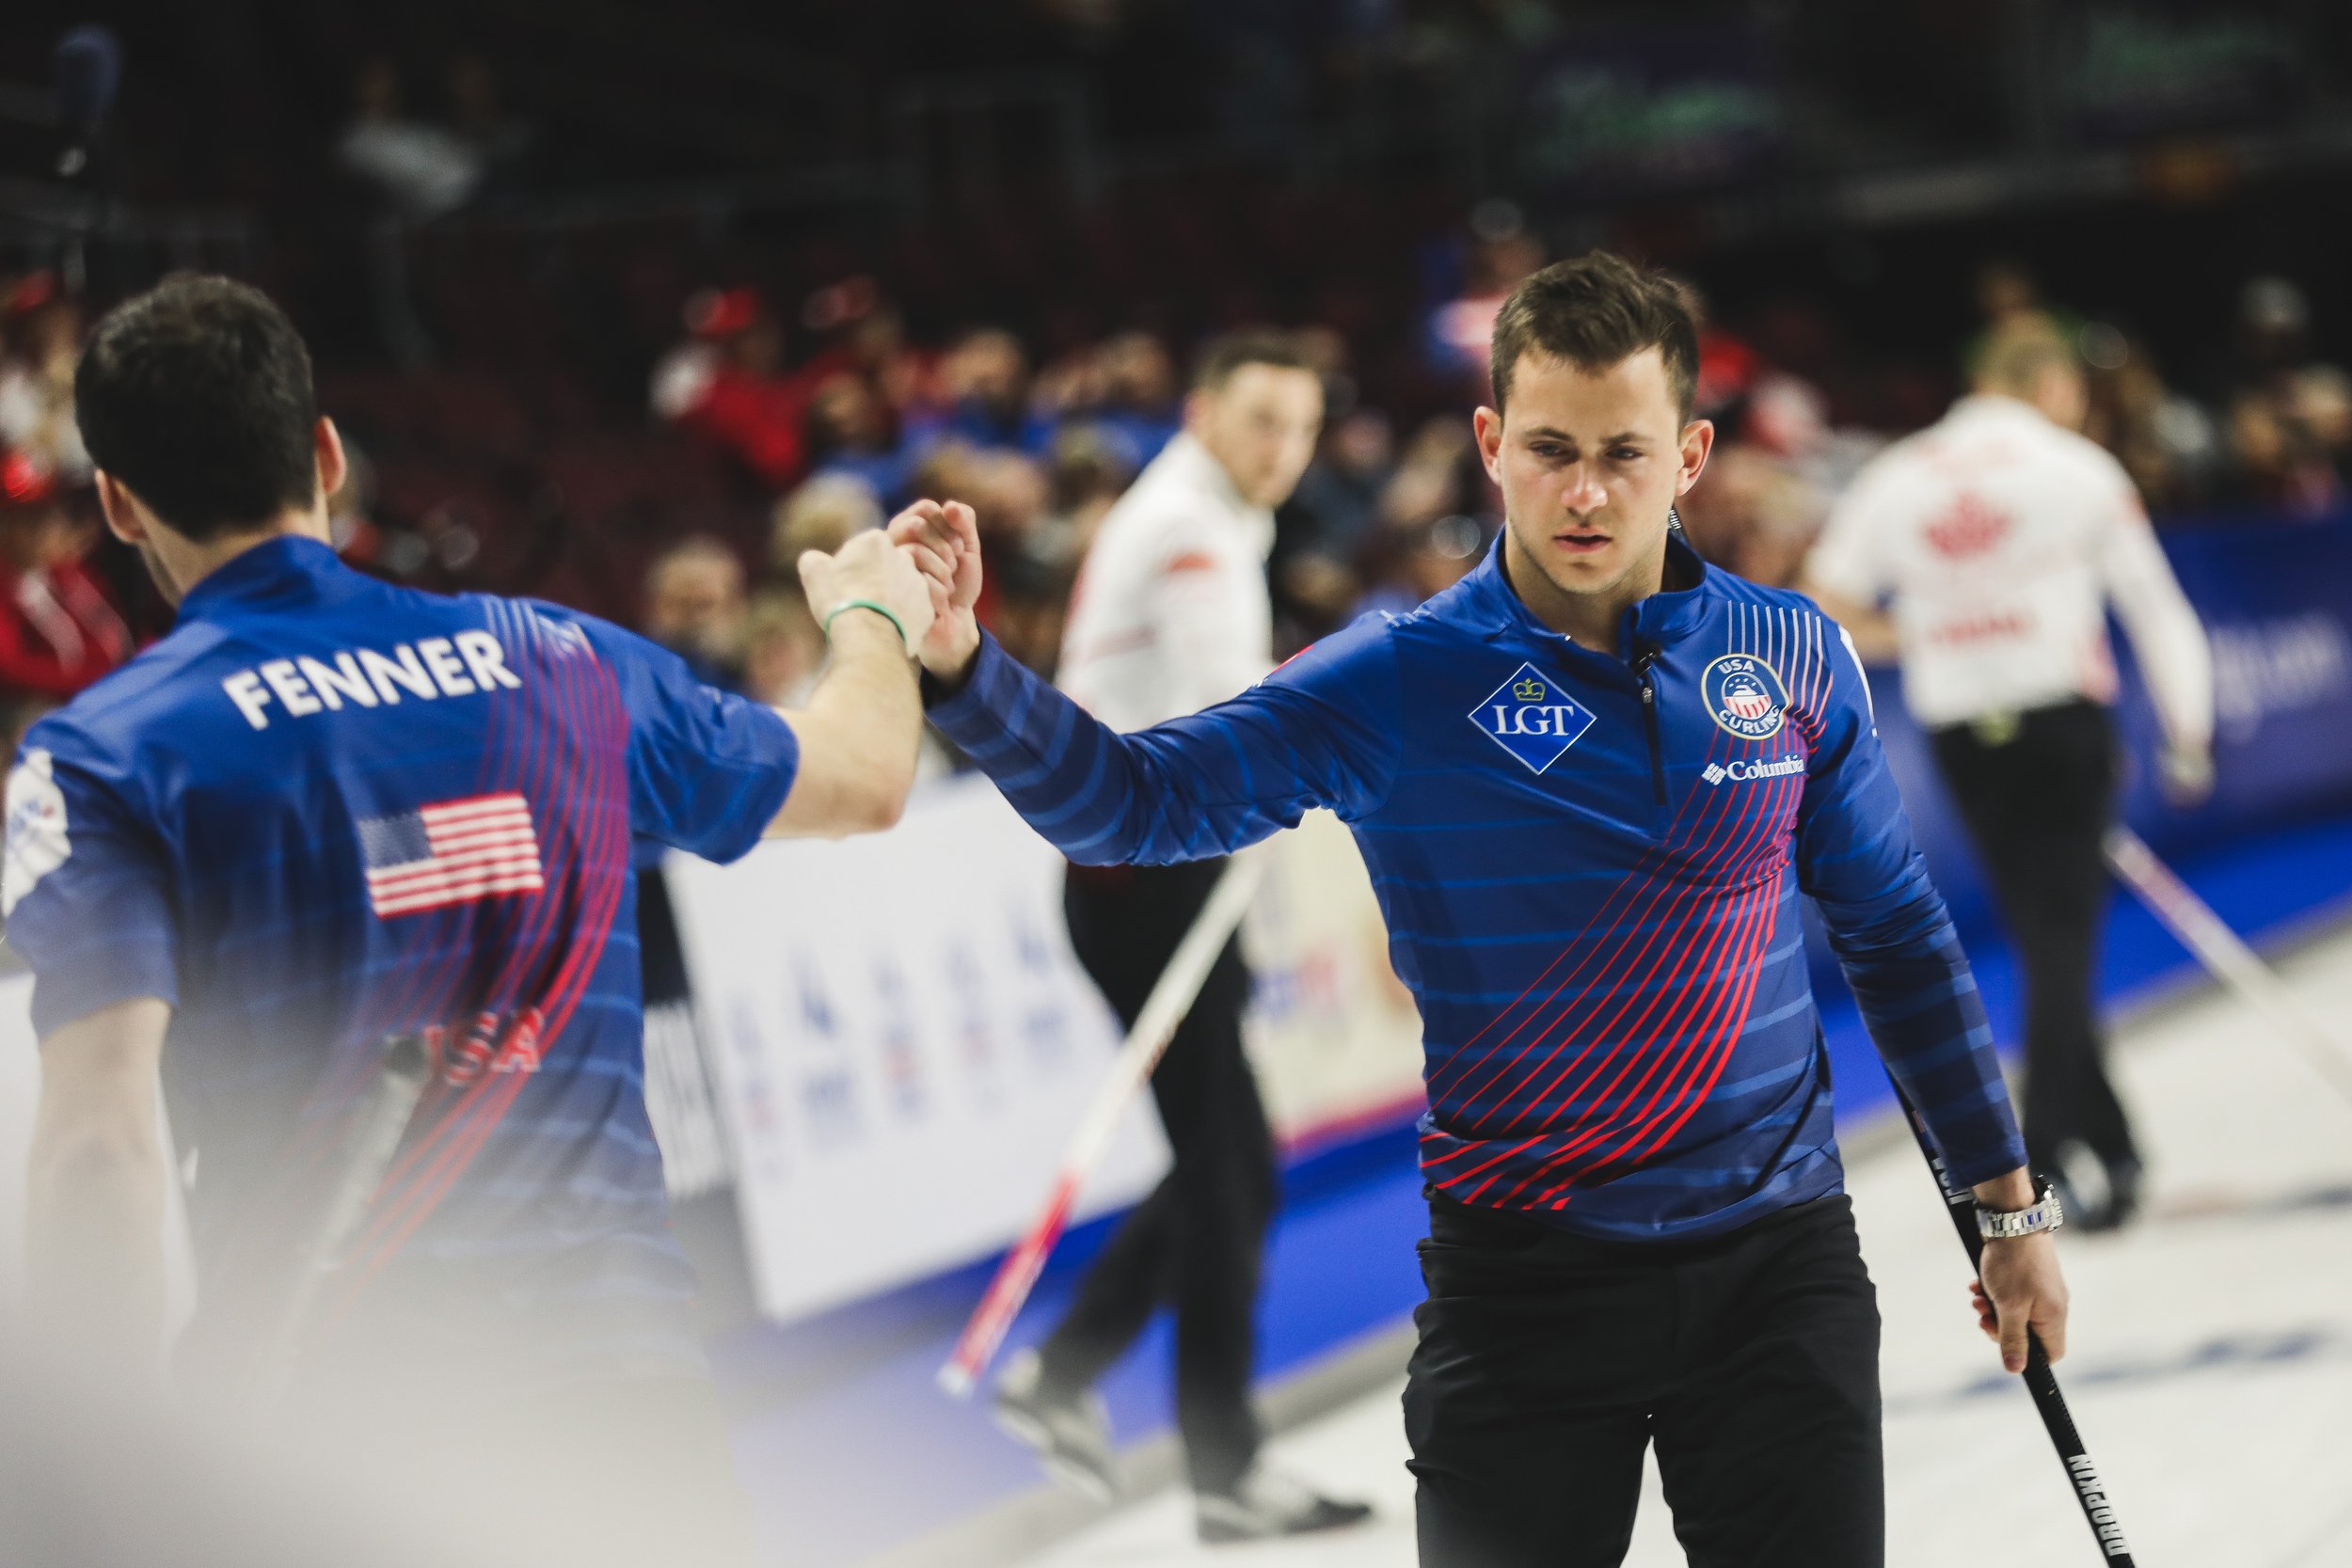 TEAM USA IN BRONZE MEDAL GAME AT WORLD MENS CURLING CHAMPIONSHIP 2022 — USA CURLING